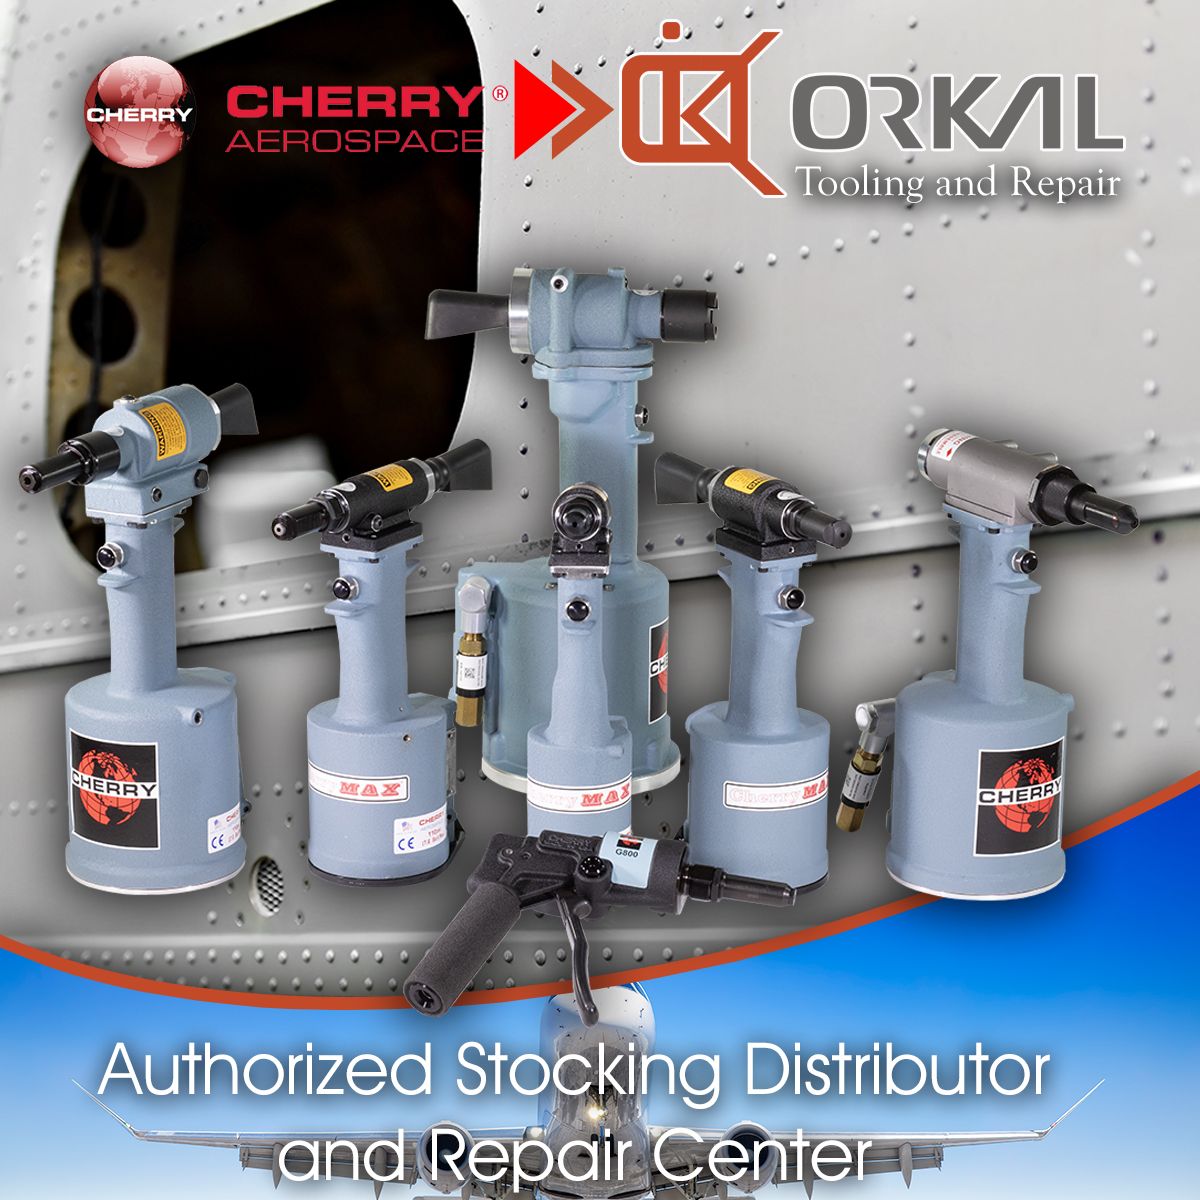 a promotional image featuring an array of cherry aerospace tools mounted on a metal background, with the cherry aerospace and orkil logos, indicating an authorized distributor and repair center.